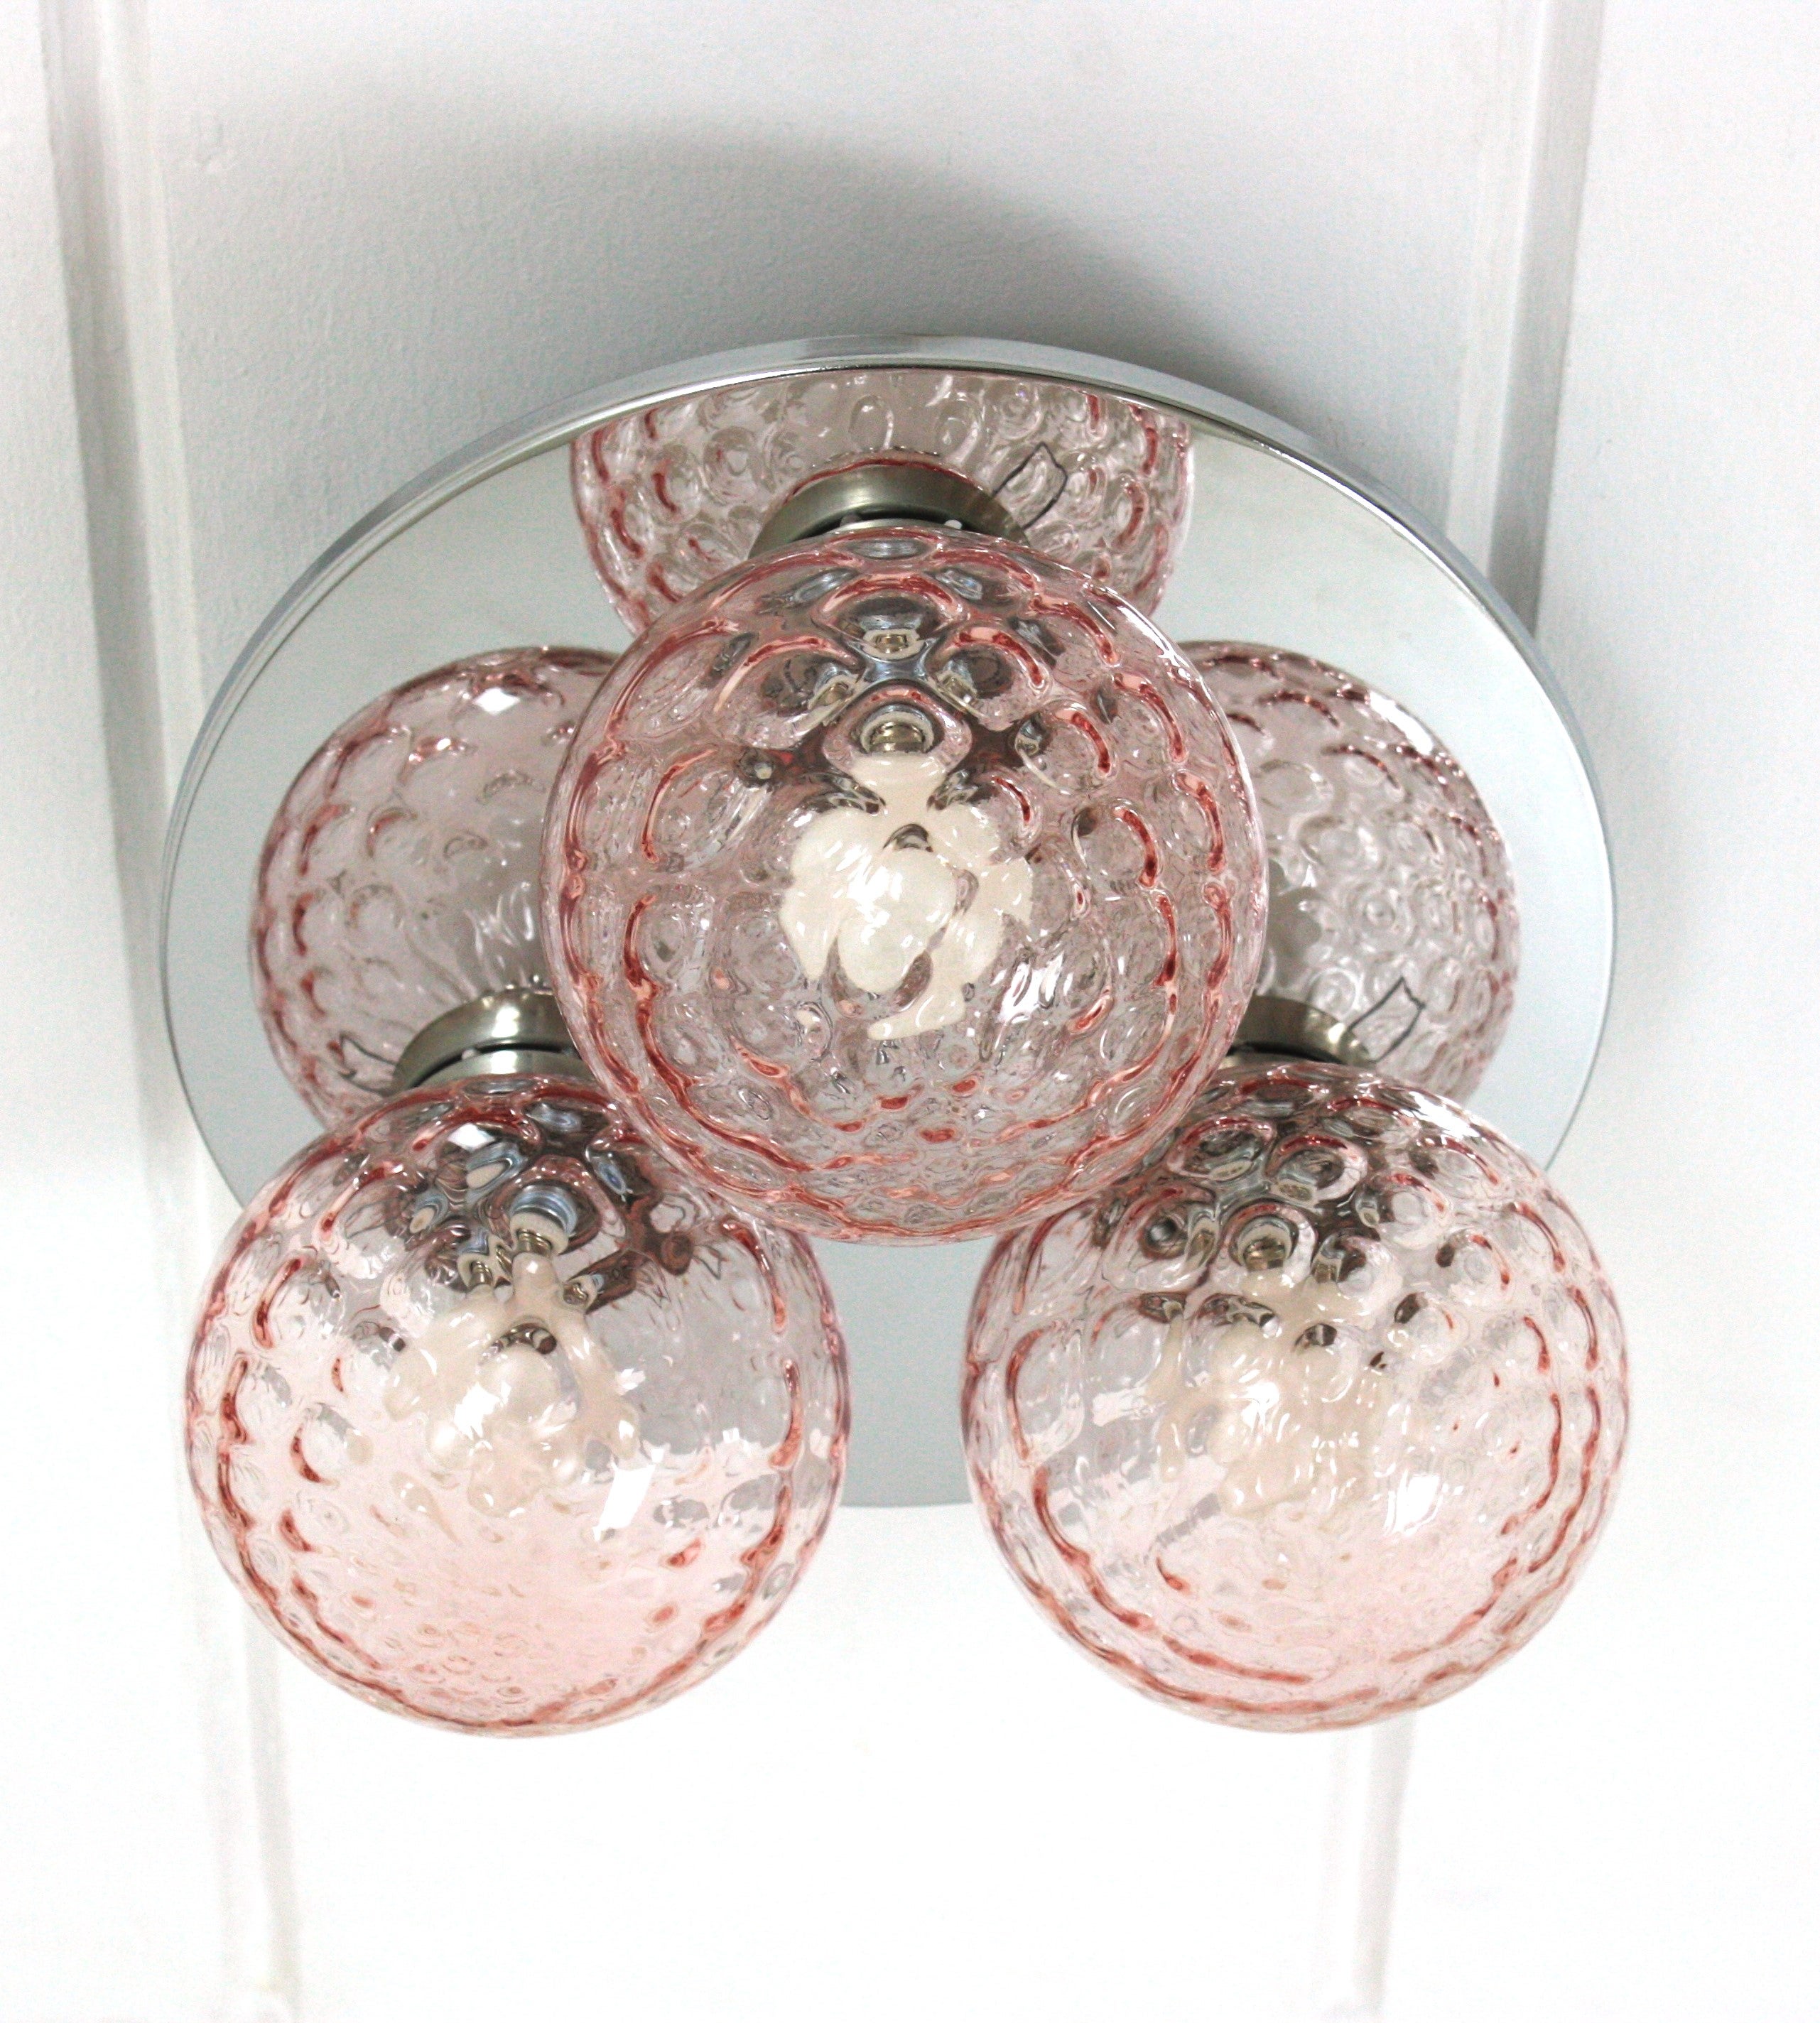 Italian Spherical Textured Globe Glass Flush Mount Ceiling Light Fixture with Chrome Base, 1960s.
This eye-catching ceiling light features a chromed steel round backplate holding 3 venetian pink blown glass globes with textured details.
The pinkish